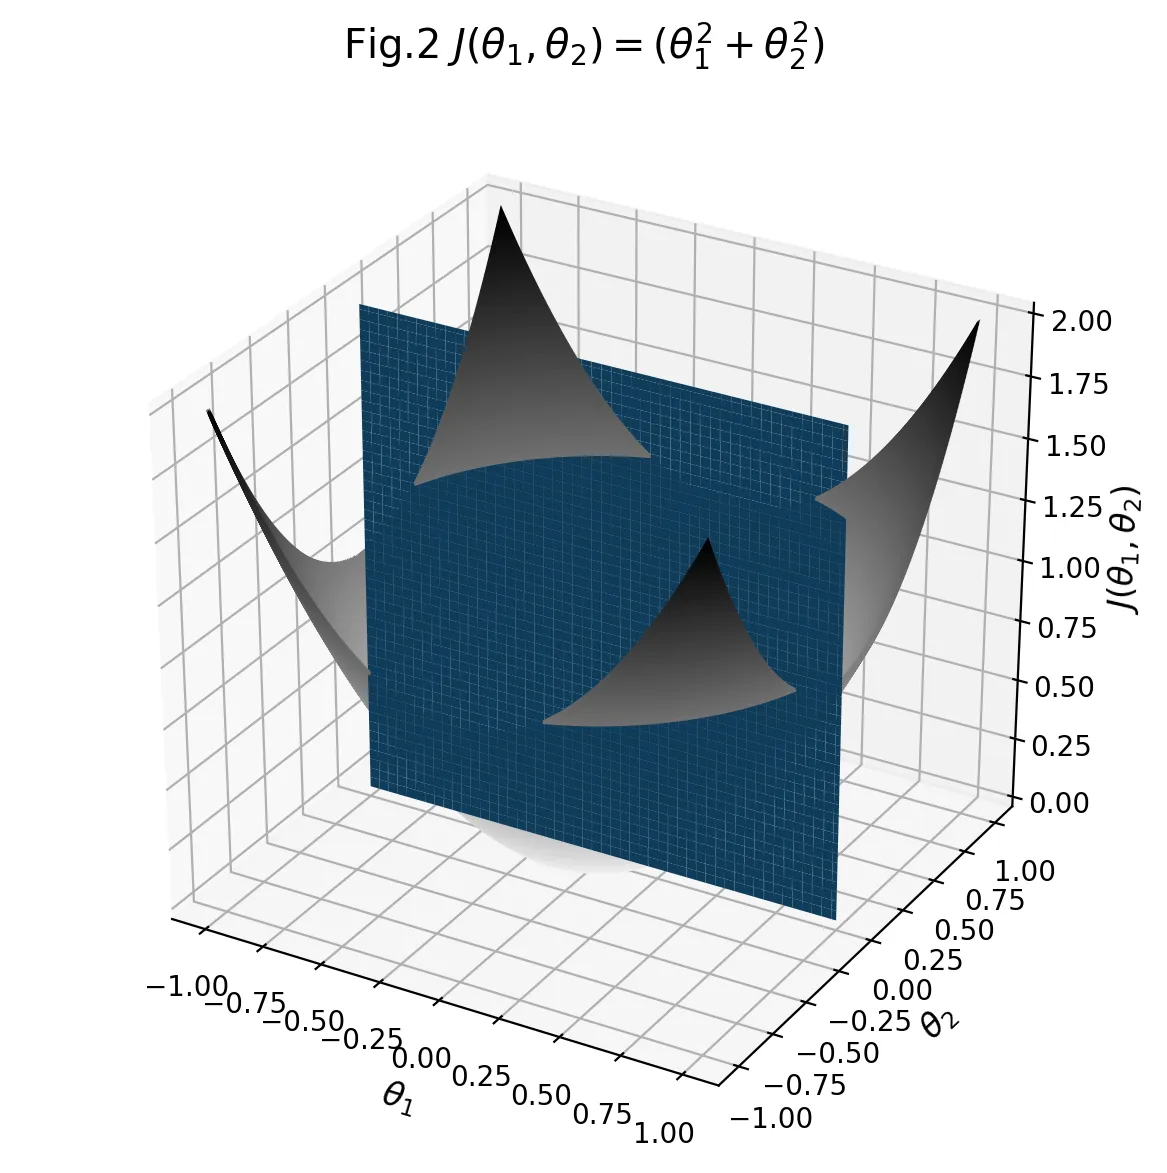 plot showing a parabolic surface with a vertical plane weirdly superimposed on it